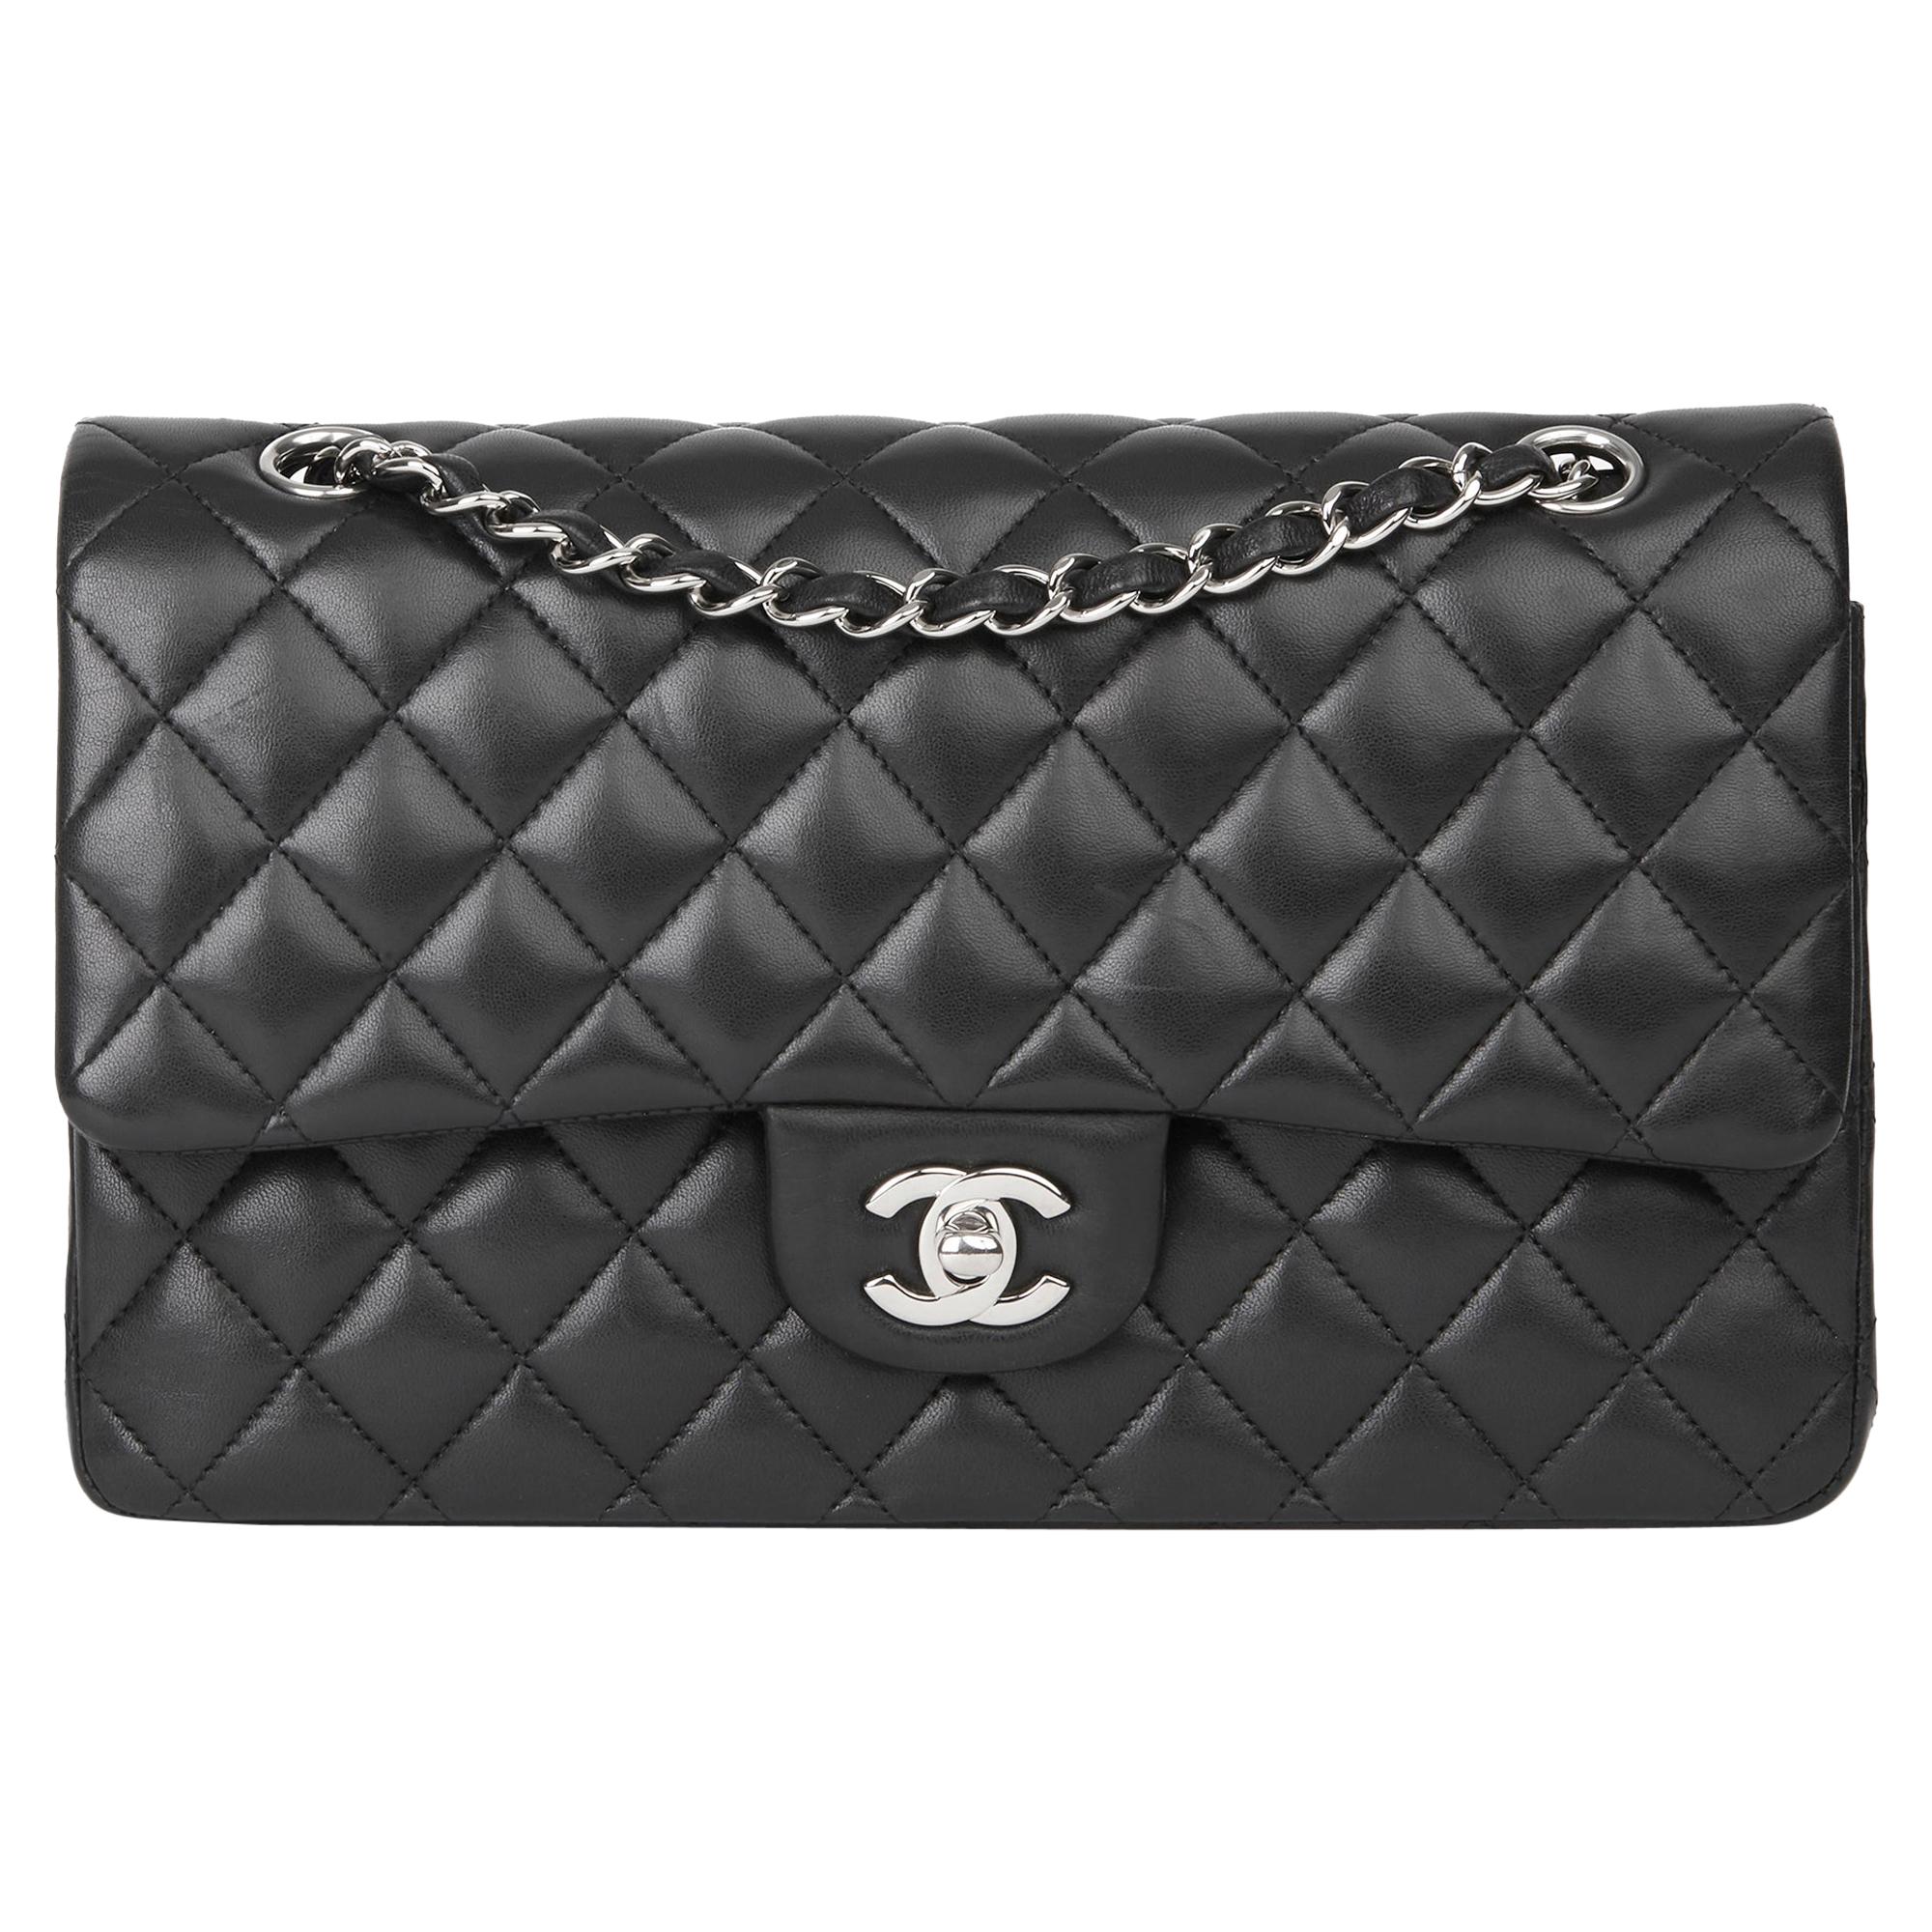 2012 Chanel Black Quilted Lambskin Medium Classic Double Flap Bag 